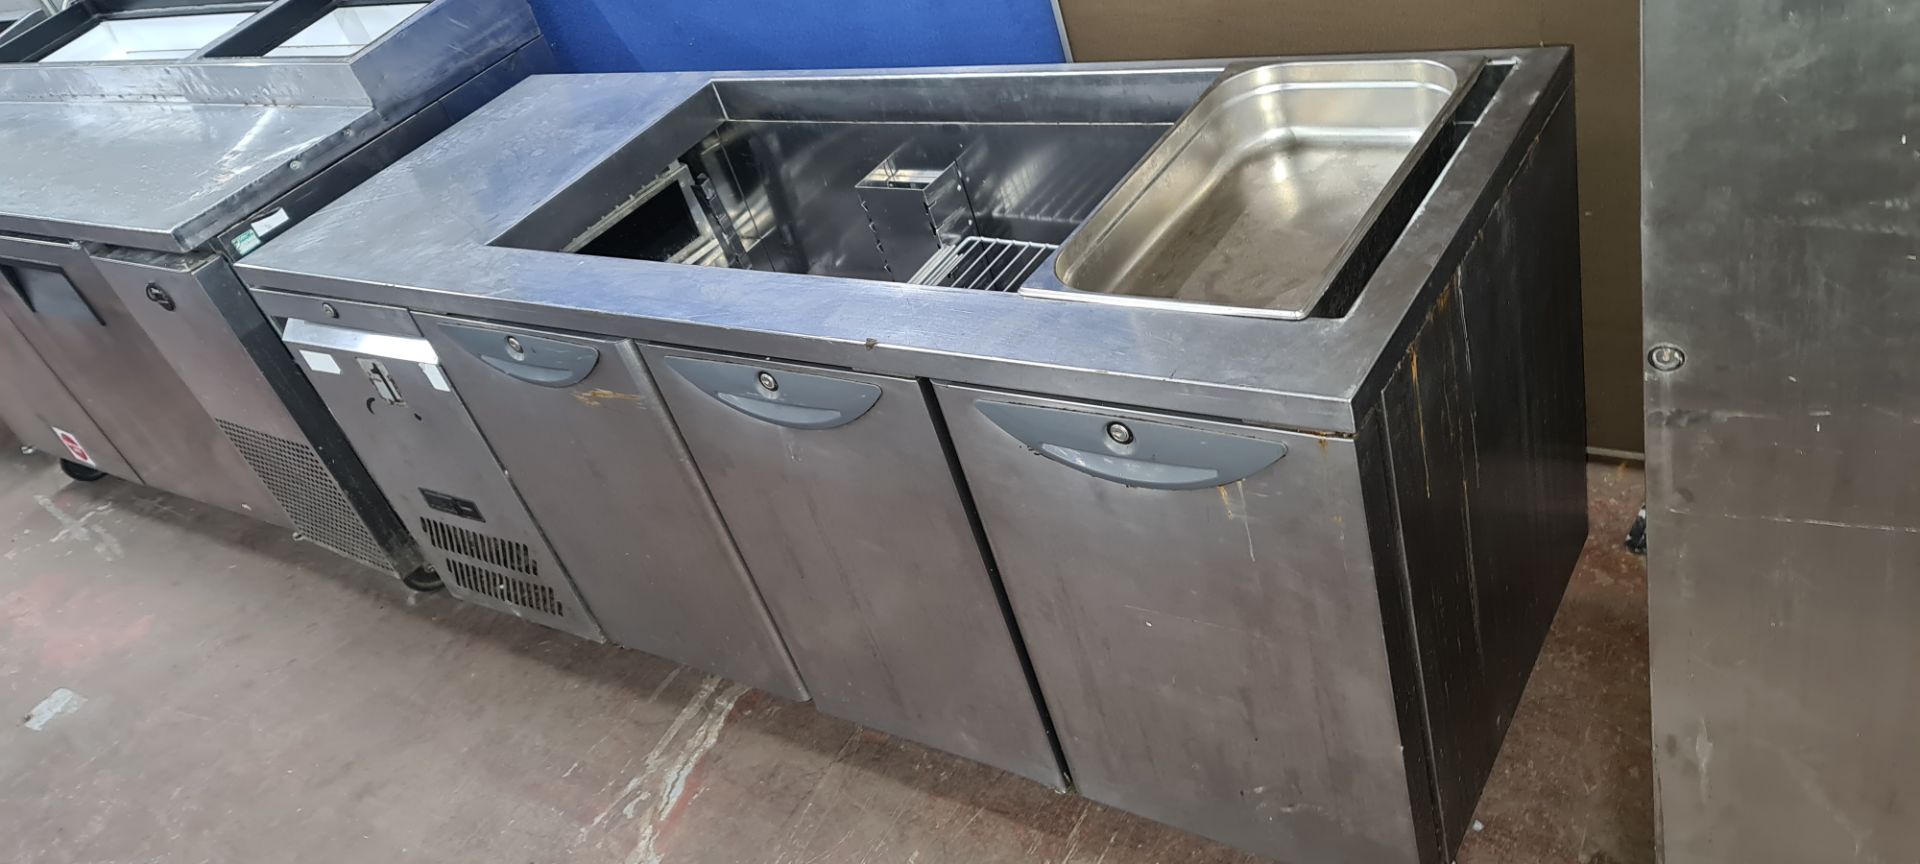 4 off assorted stainless steel refrigerated prep cabinets - Image 16 of 28